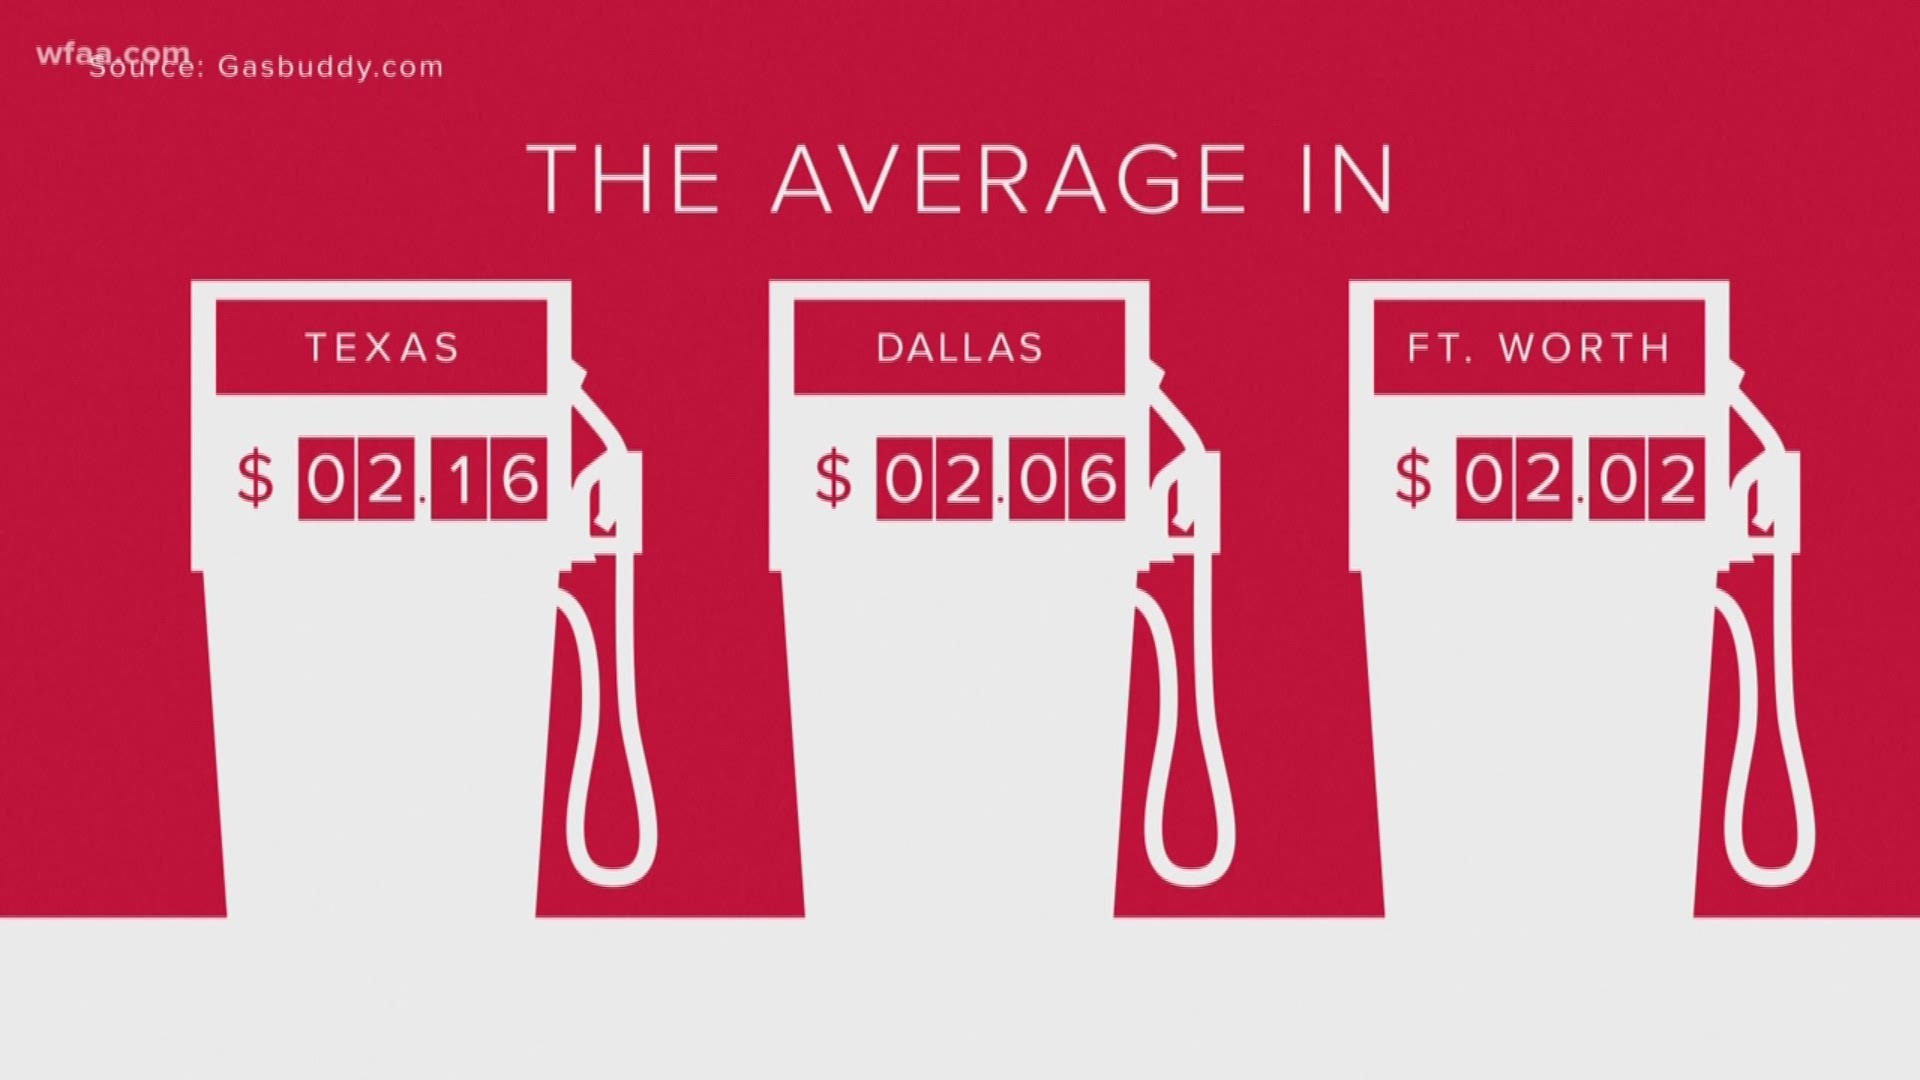 cheapest gas prices of 2018 are in texas wfaa com cheapest gas in the country in denton